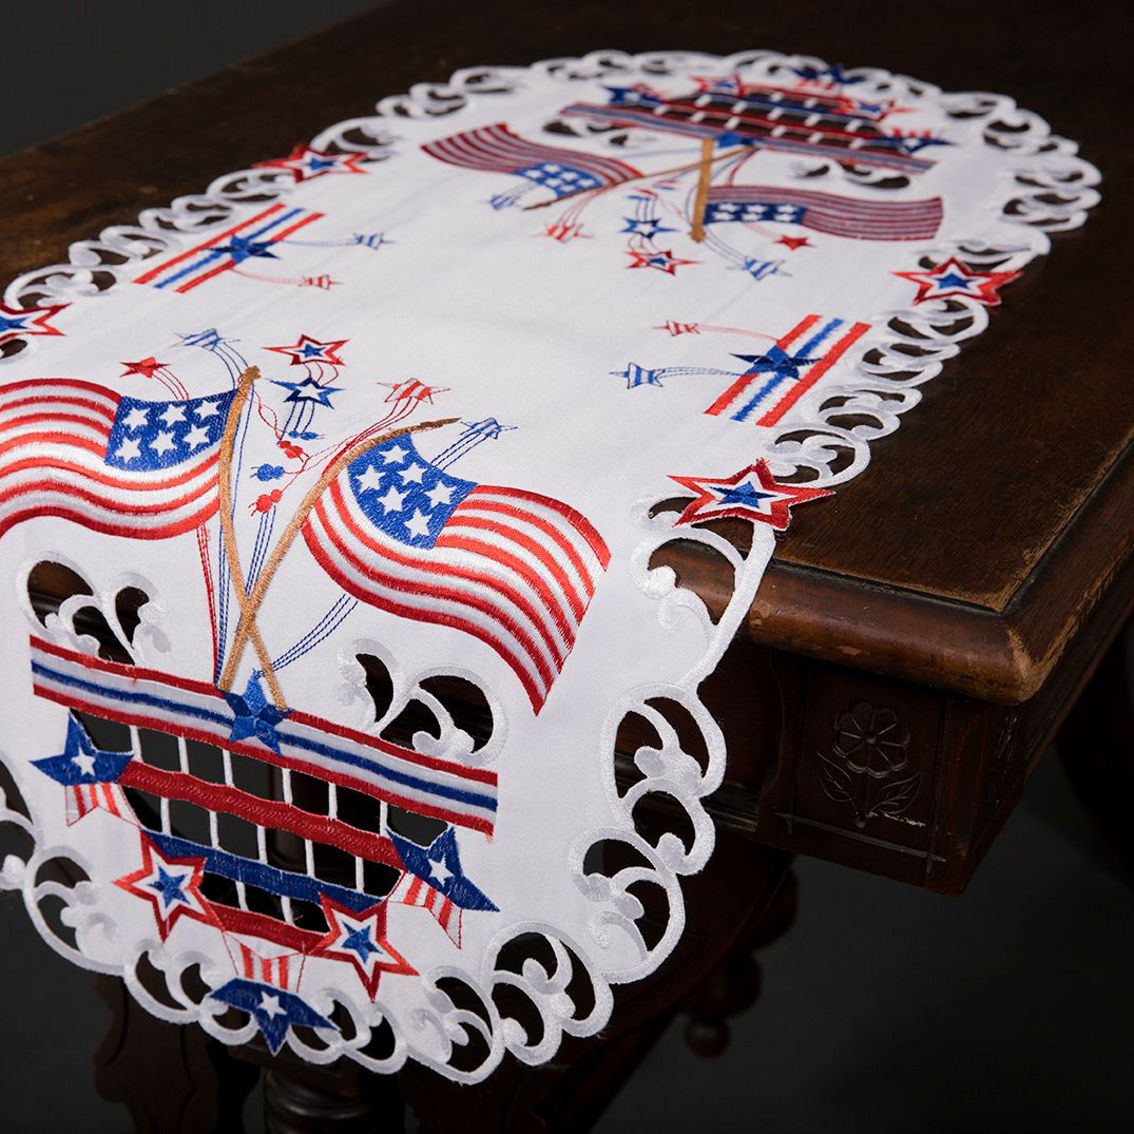 Xia Home Fashions Star Spangled Embroidered Cutwork Table Runner, 15 by 34-Inch - Image 3 of 3